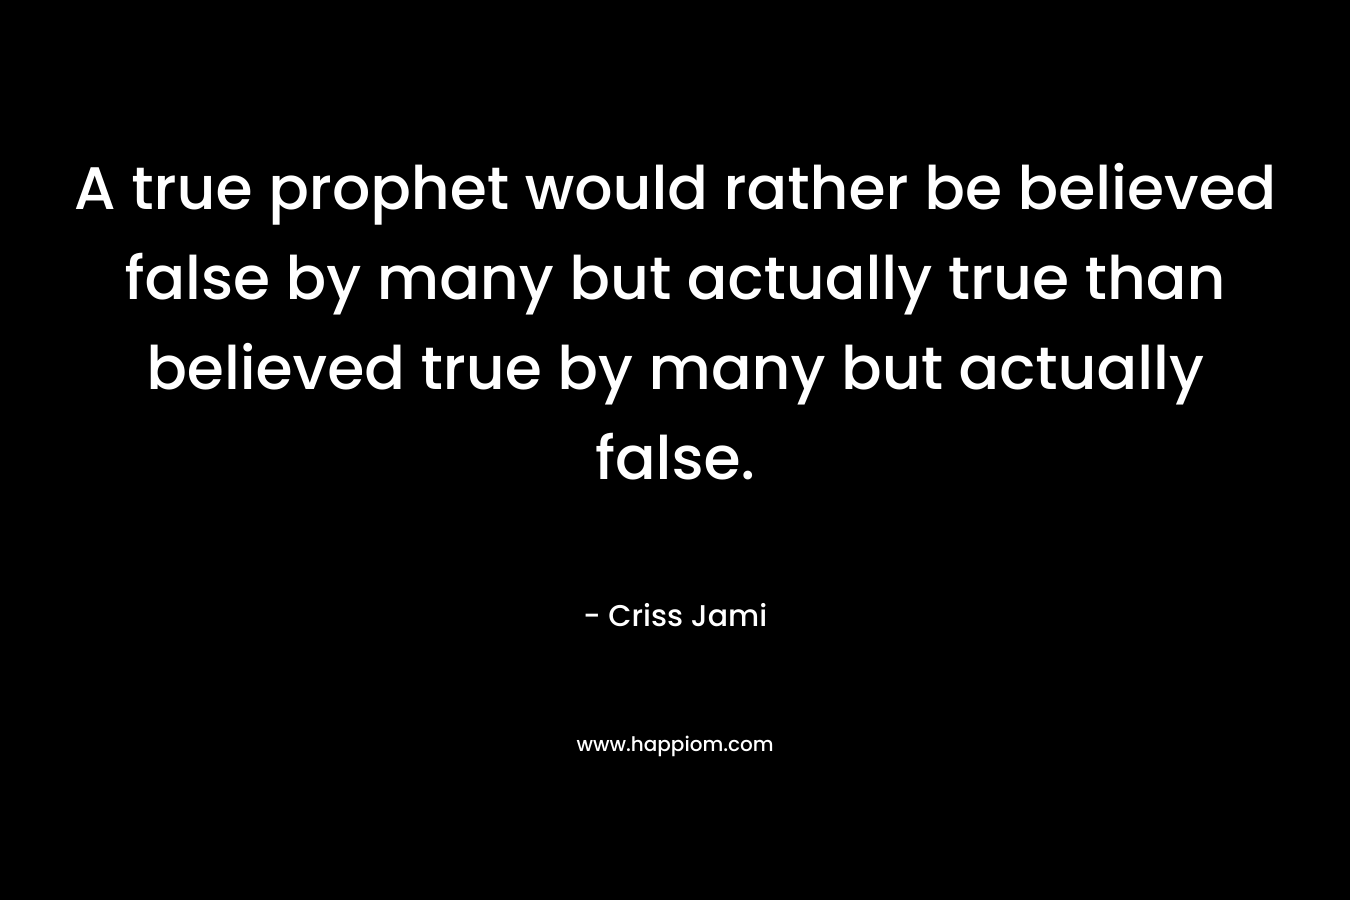 A true prophet would rather be believed false by many but actually true than believed true by many but actually false.